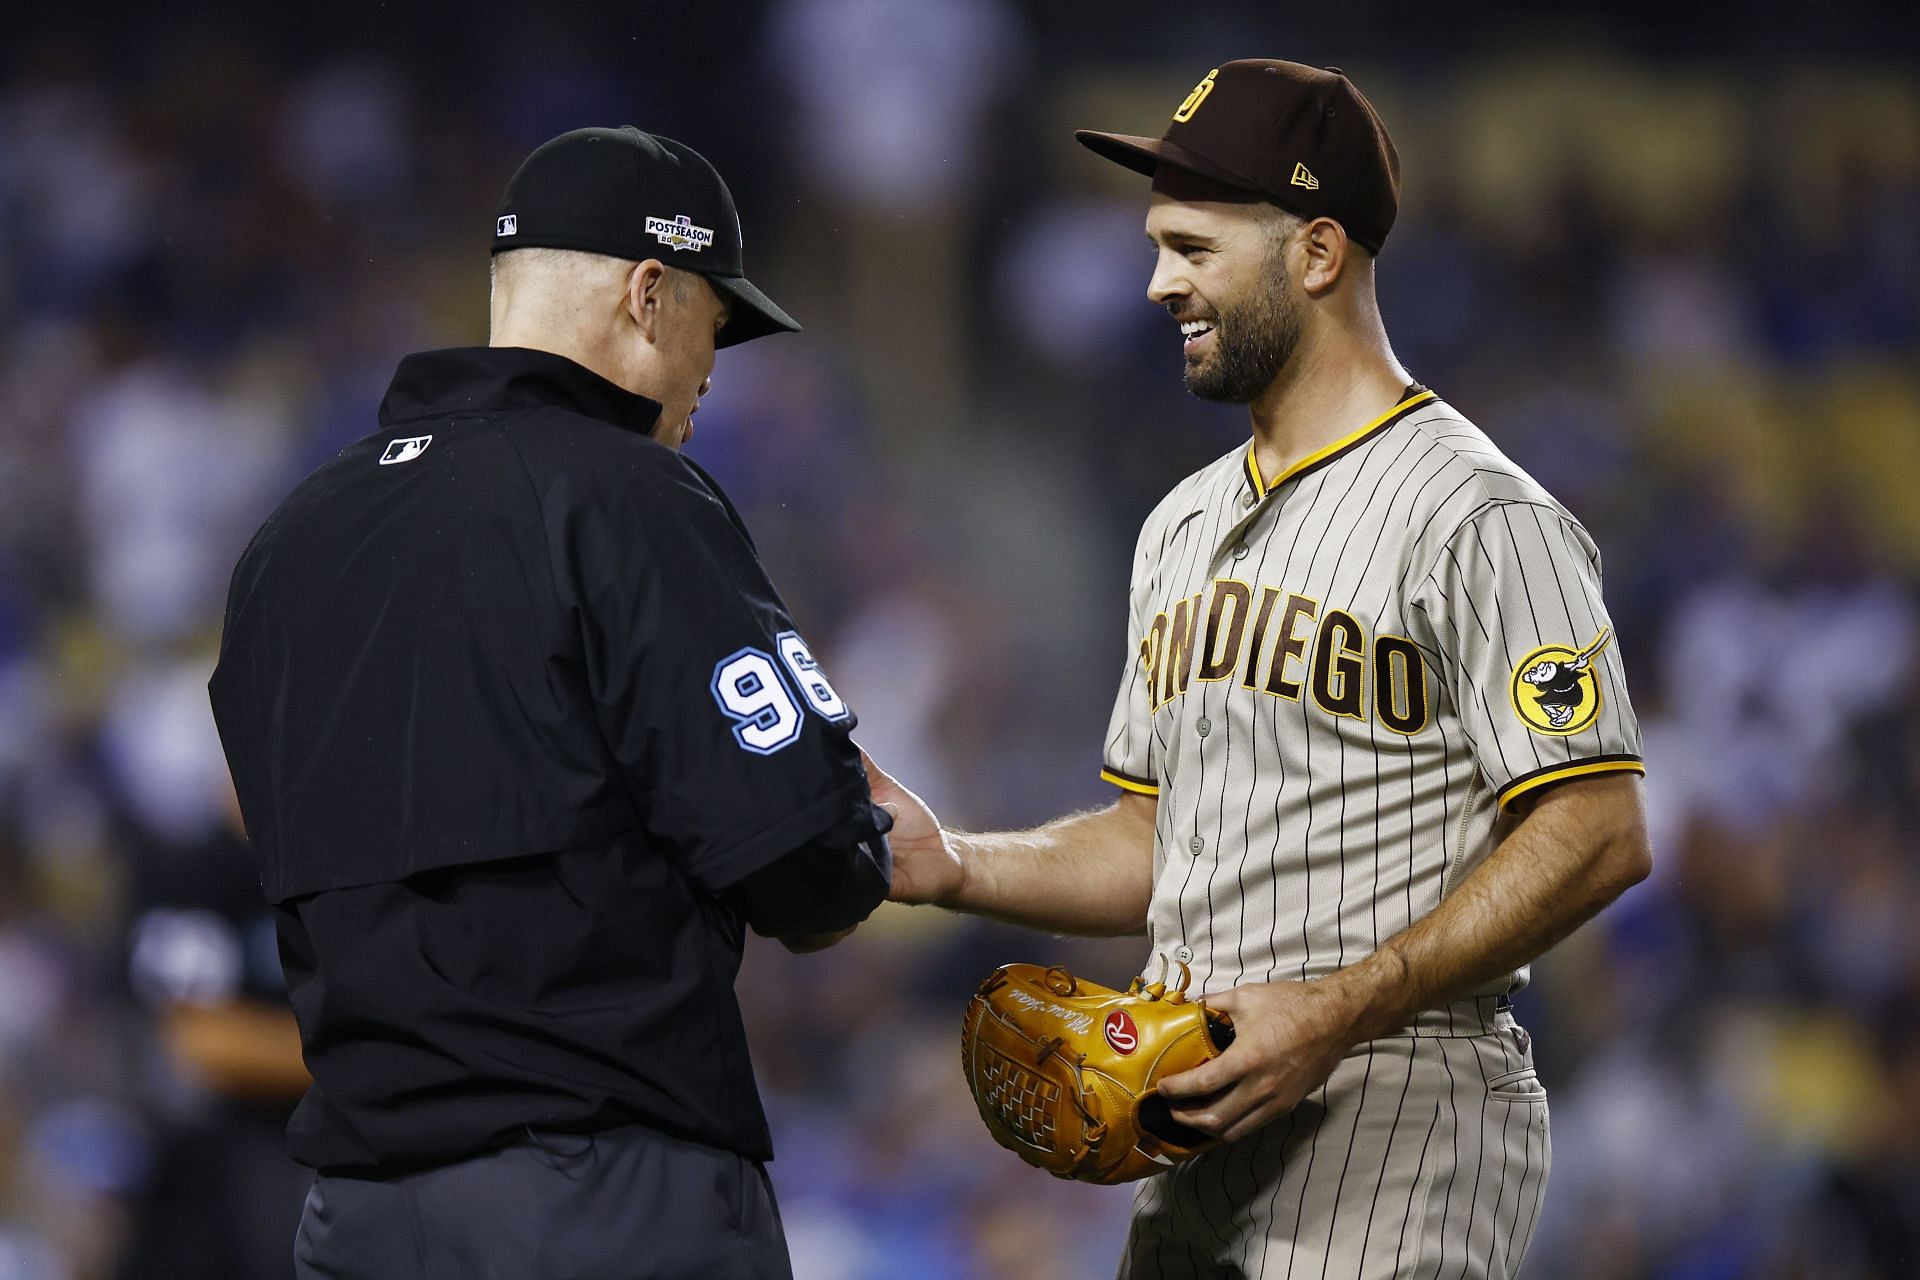 San Diego Padres fans infuriated by numerous controversial calls